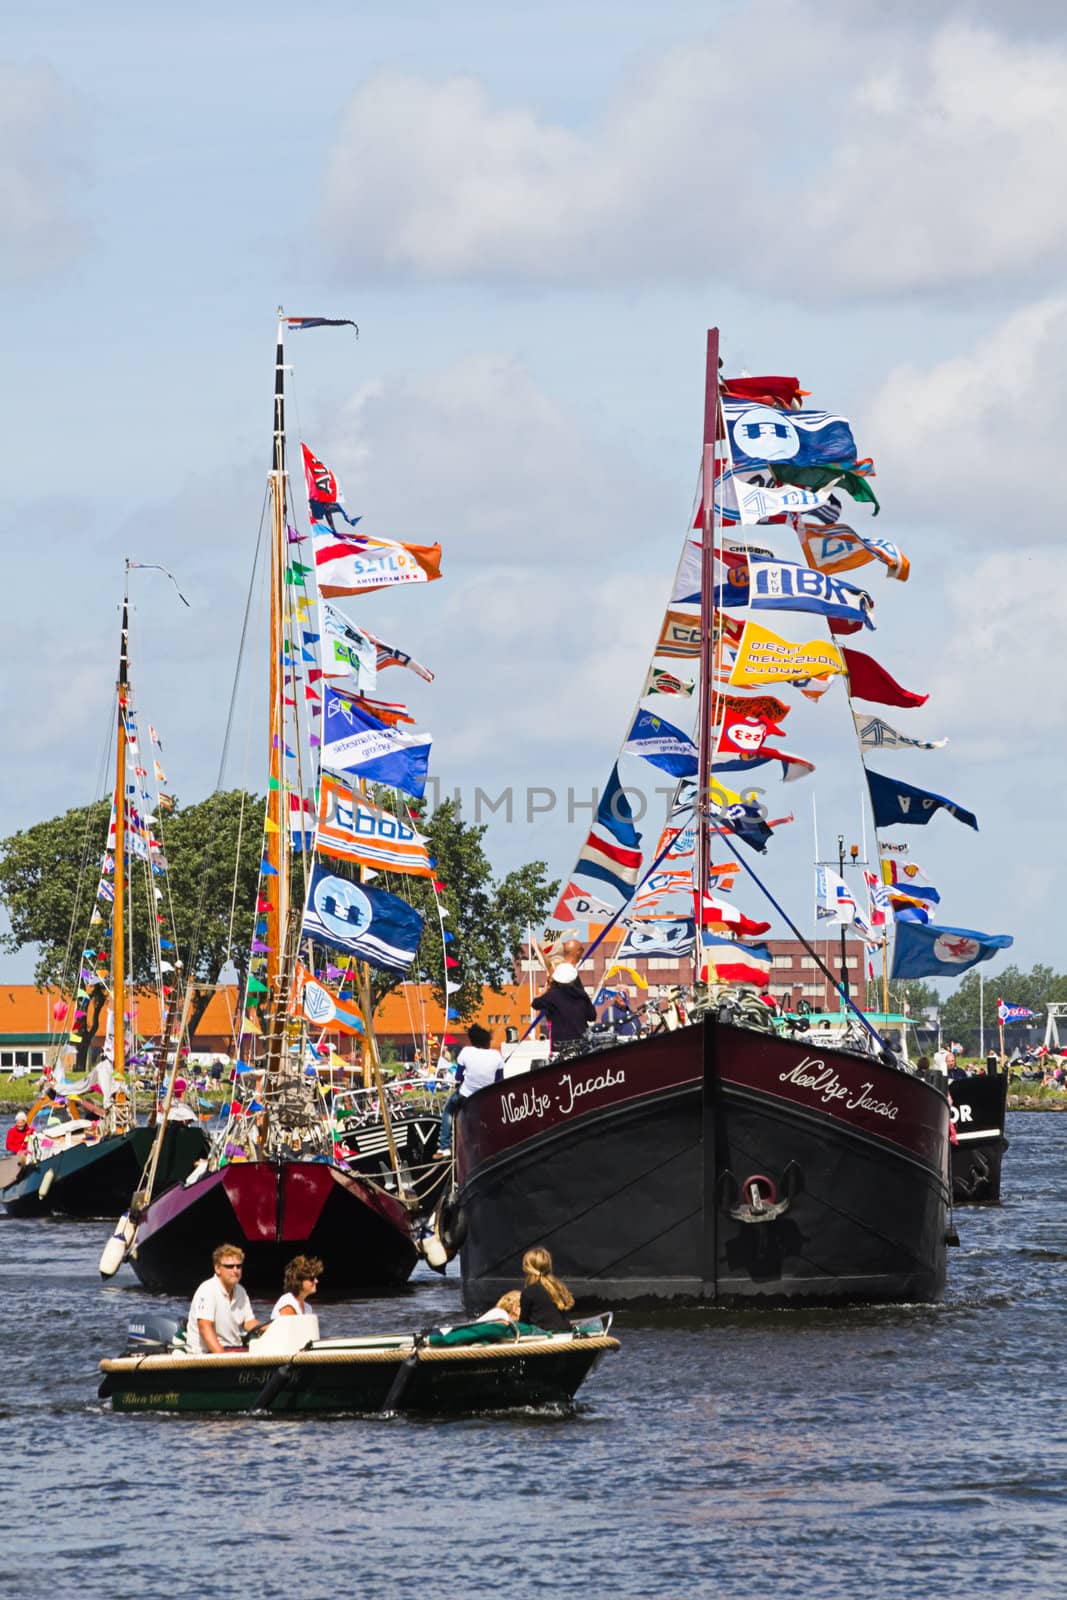 SAIL AMSTERDAM 2010 -IJMUIDEN, THE NETHERLANDS - AUGUST 2010: Sail 2010 starts with the spectaculair Sail-in Parade.  50 Tall ships and more than 500 of  naval ships, replicas and yachts sail in convoy through the North Sea Canal from IJmuiden to Amsterdam. Thousands of private boats accompany the fleet and more than 300.000 visitors watch the parade from the banks. August 19, 2010, IJmuiden, the Netherlands